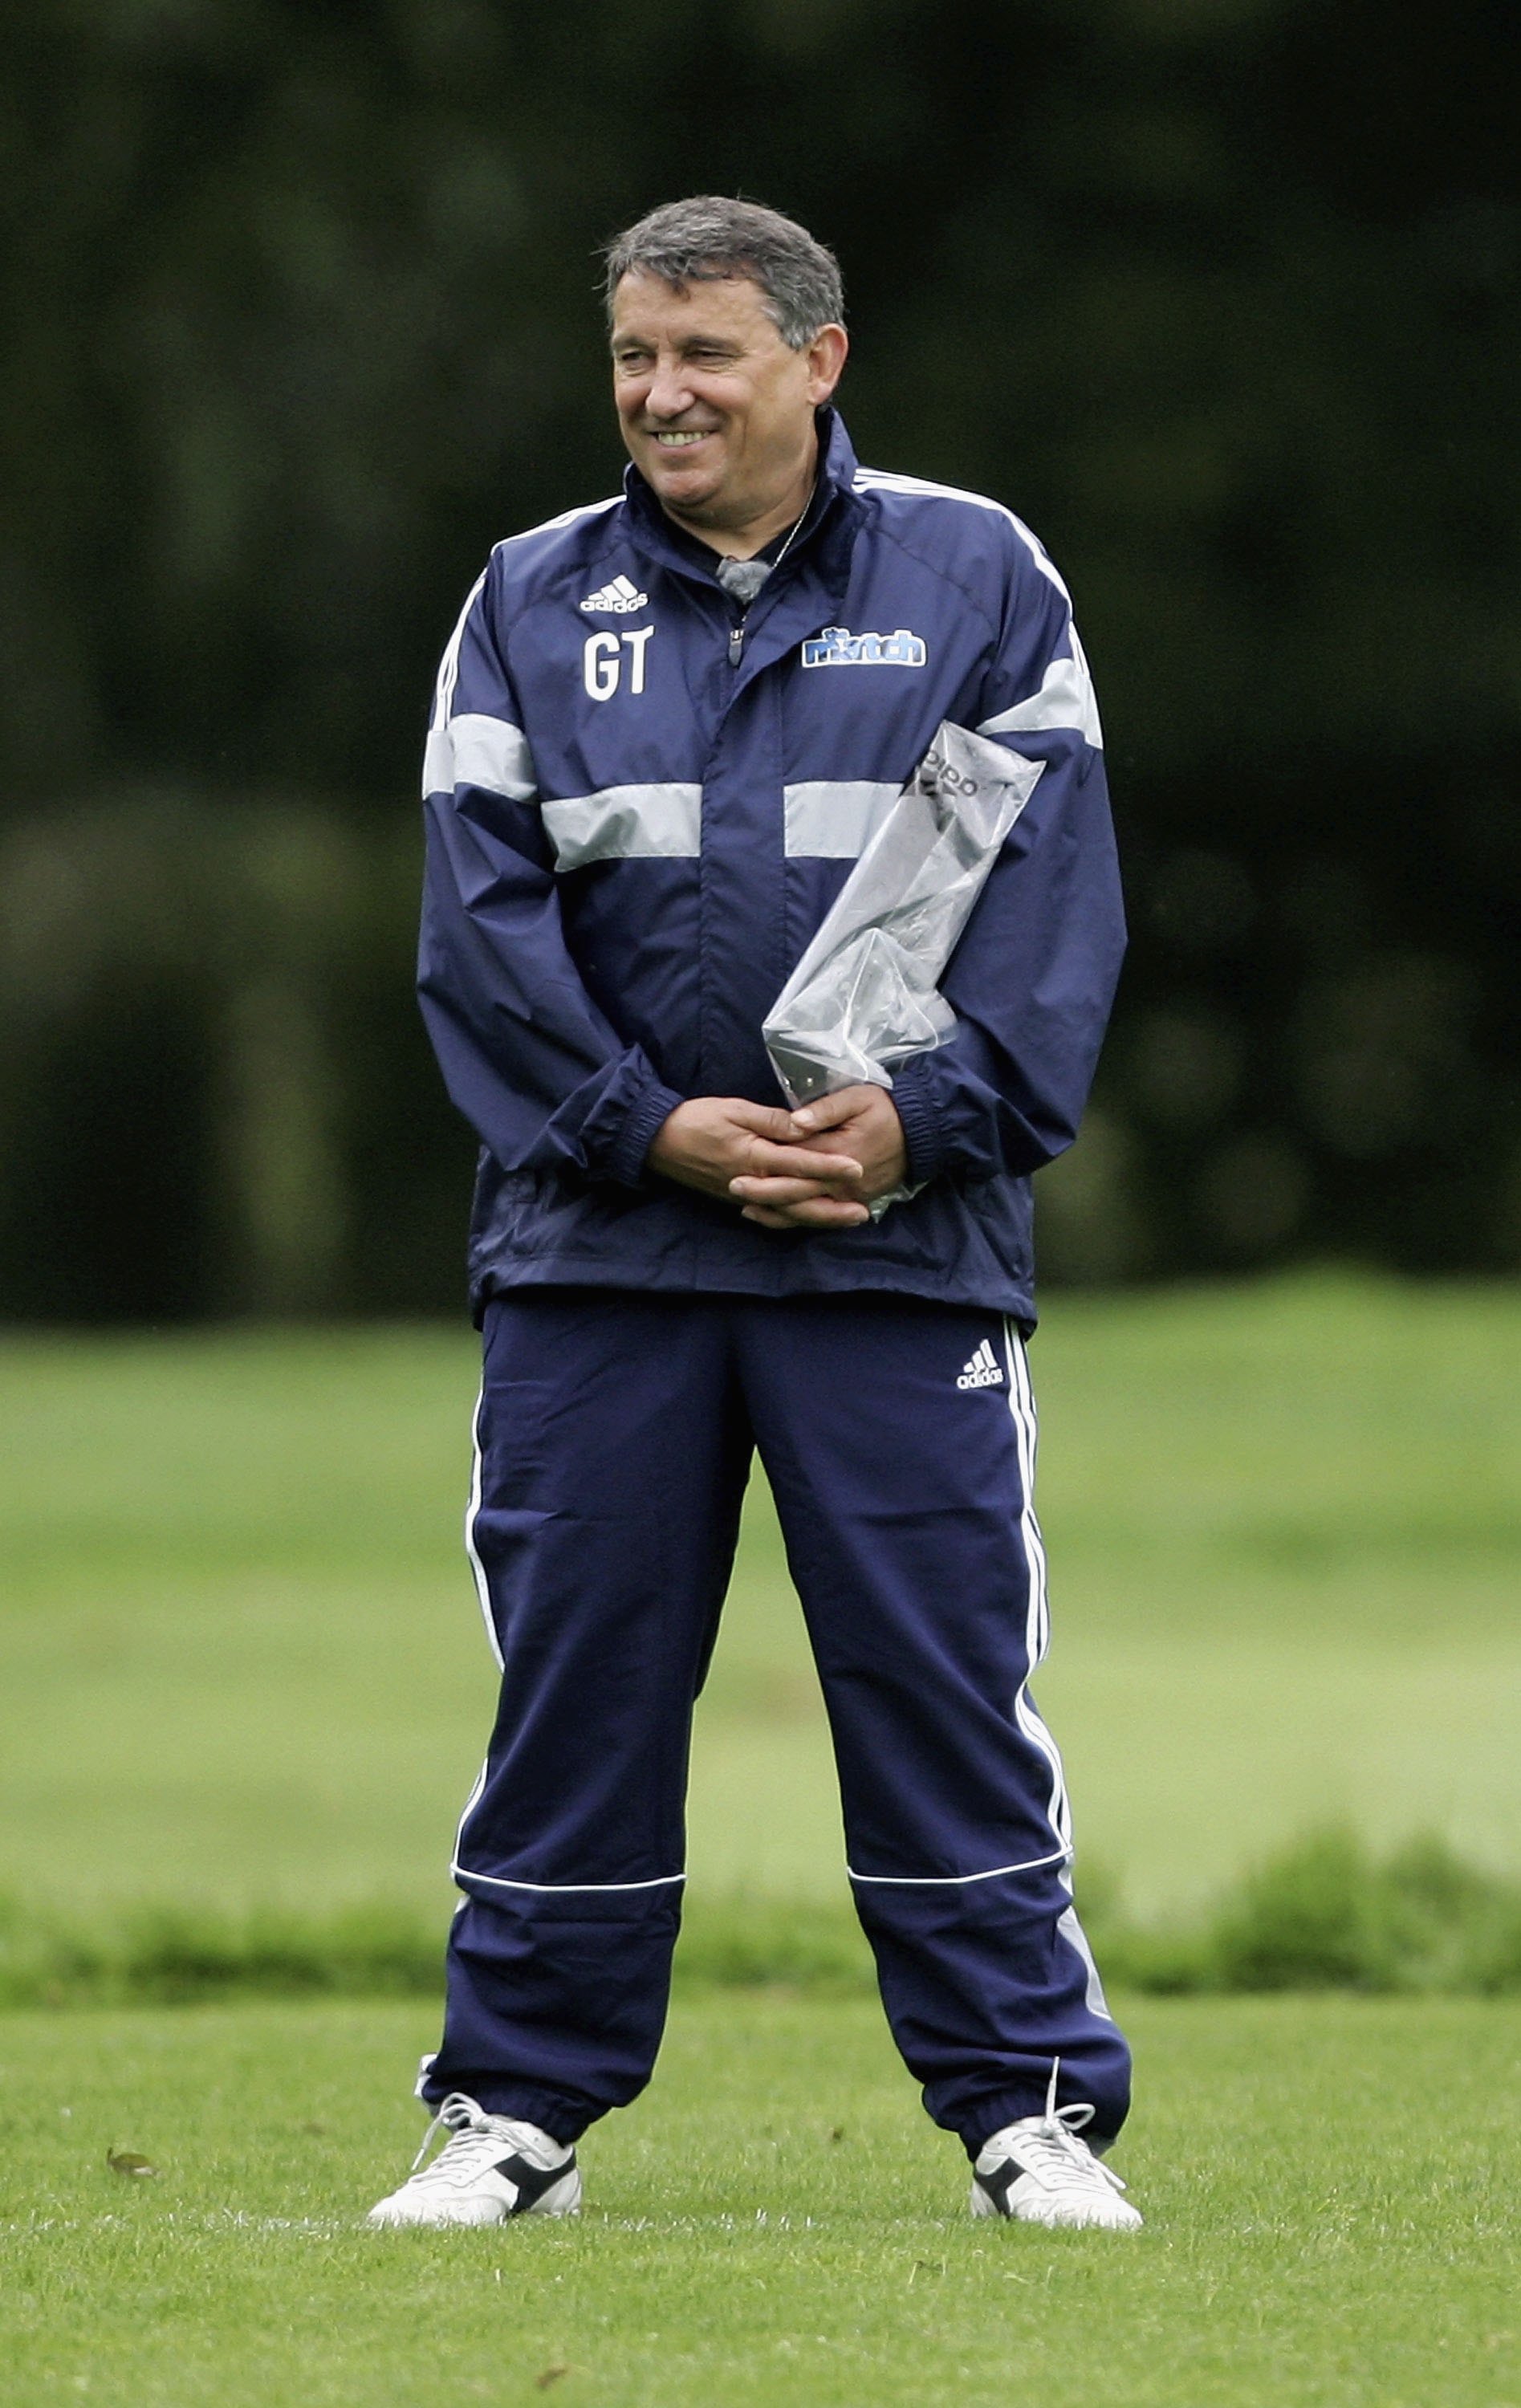 LONDON - SEPTEMBER 02:  Graham Taylor takes notes on the pitch during the trials for Sky One's The Match at Bisham Abbey on September 2, 2006 in London, England. Celebrities are taking part in the trials where former England manager Graham Taylor will sel